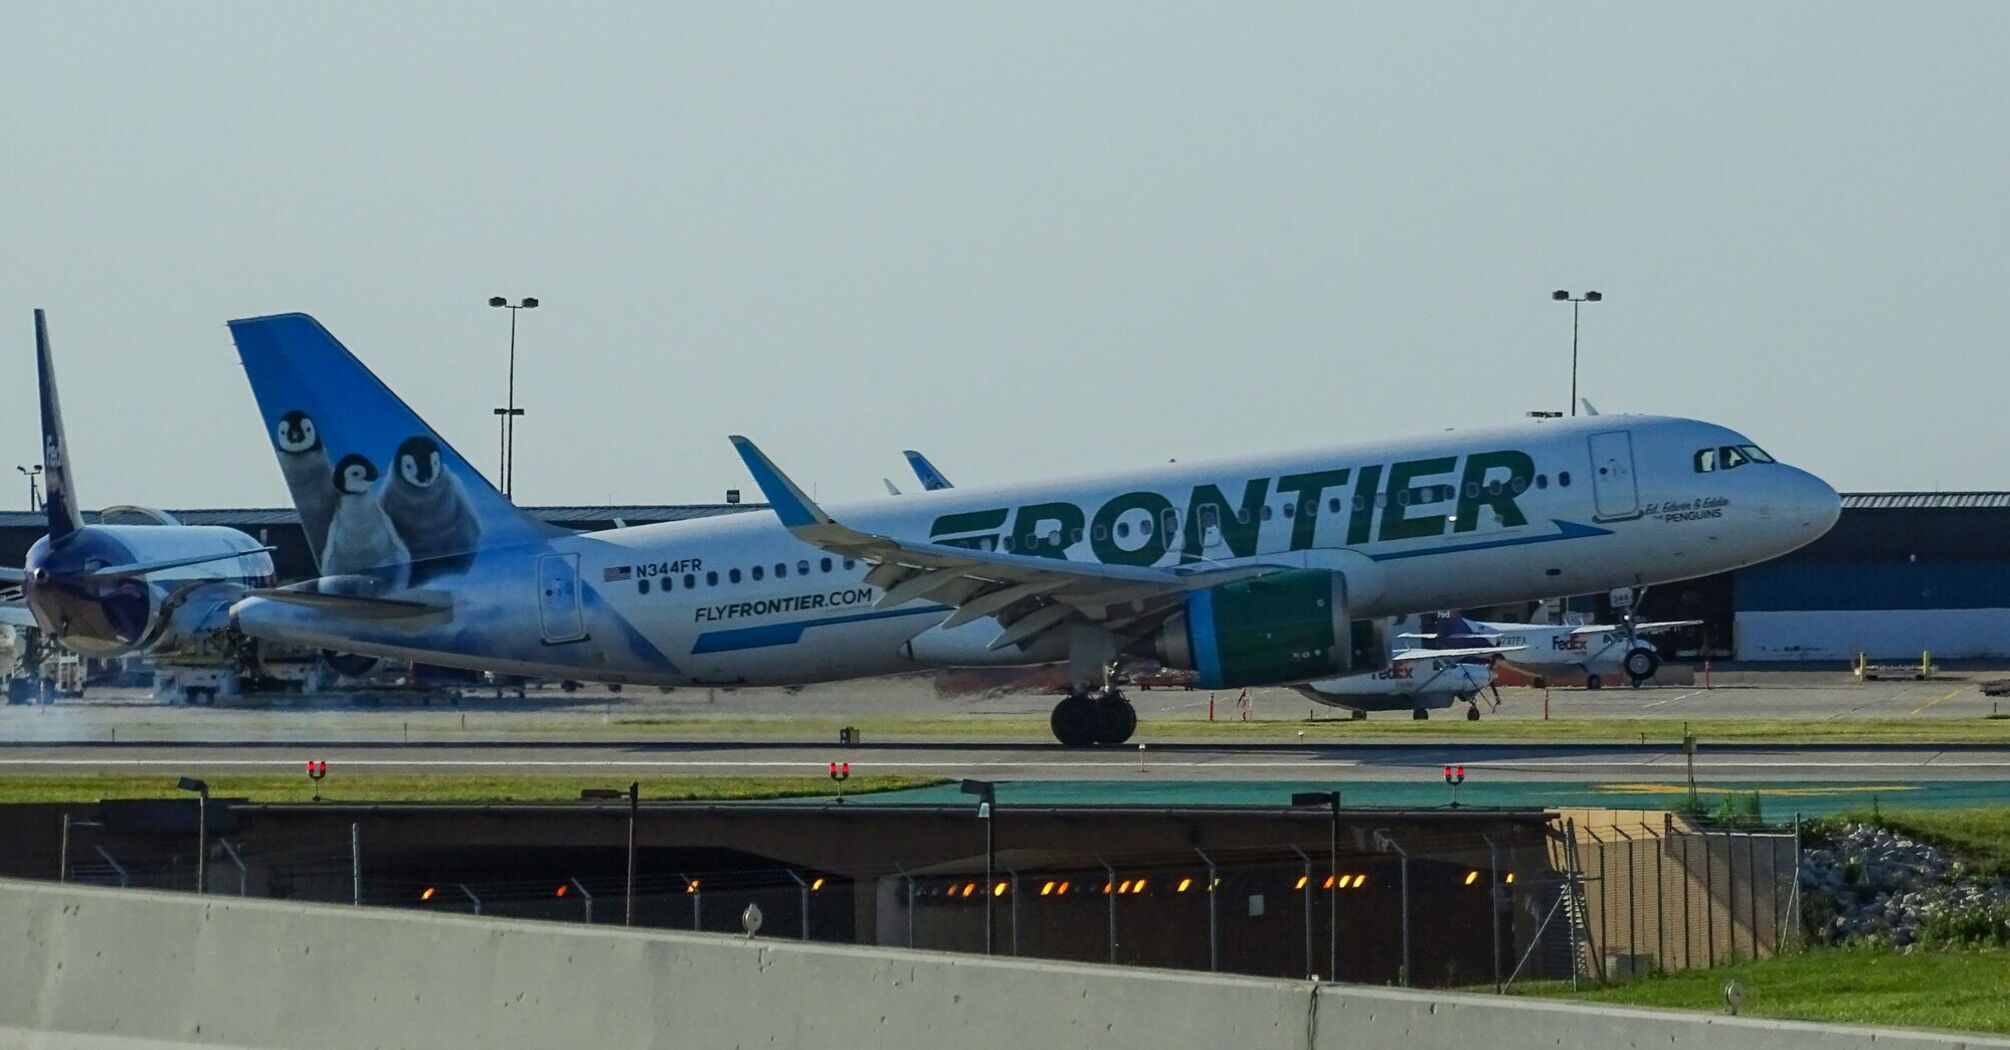 Frontier Airlines passengers evacuated due to a strong stench: what is known